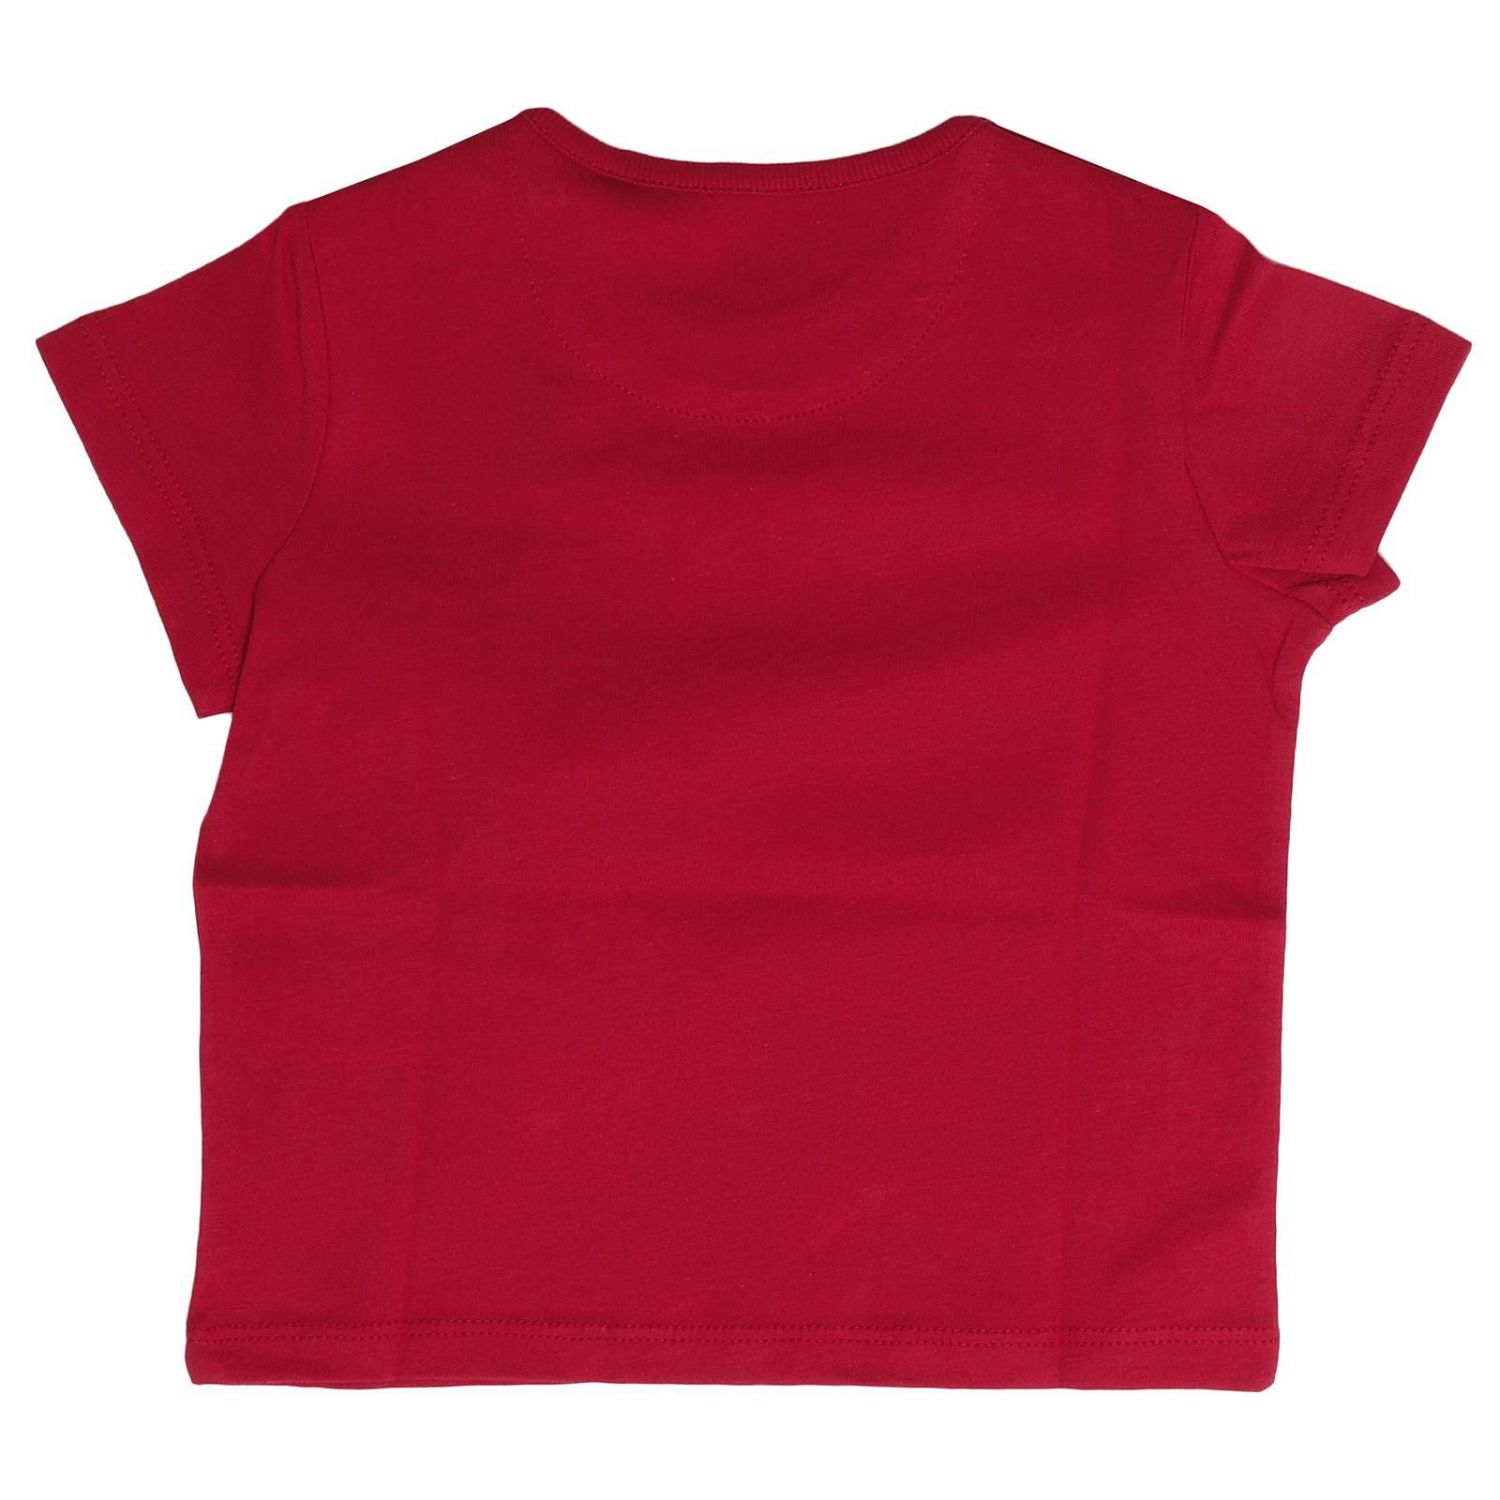 Burberry Layette Outlet: T-shirt kids | T-Shirt Burberry Layette Kids ...